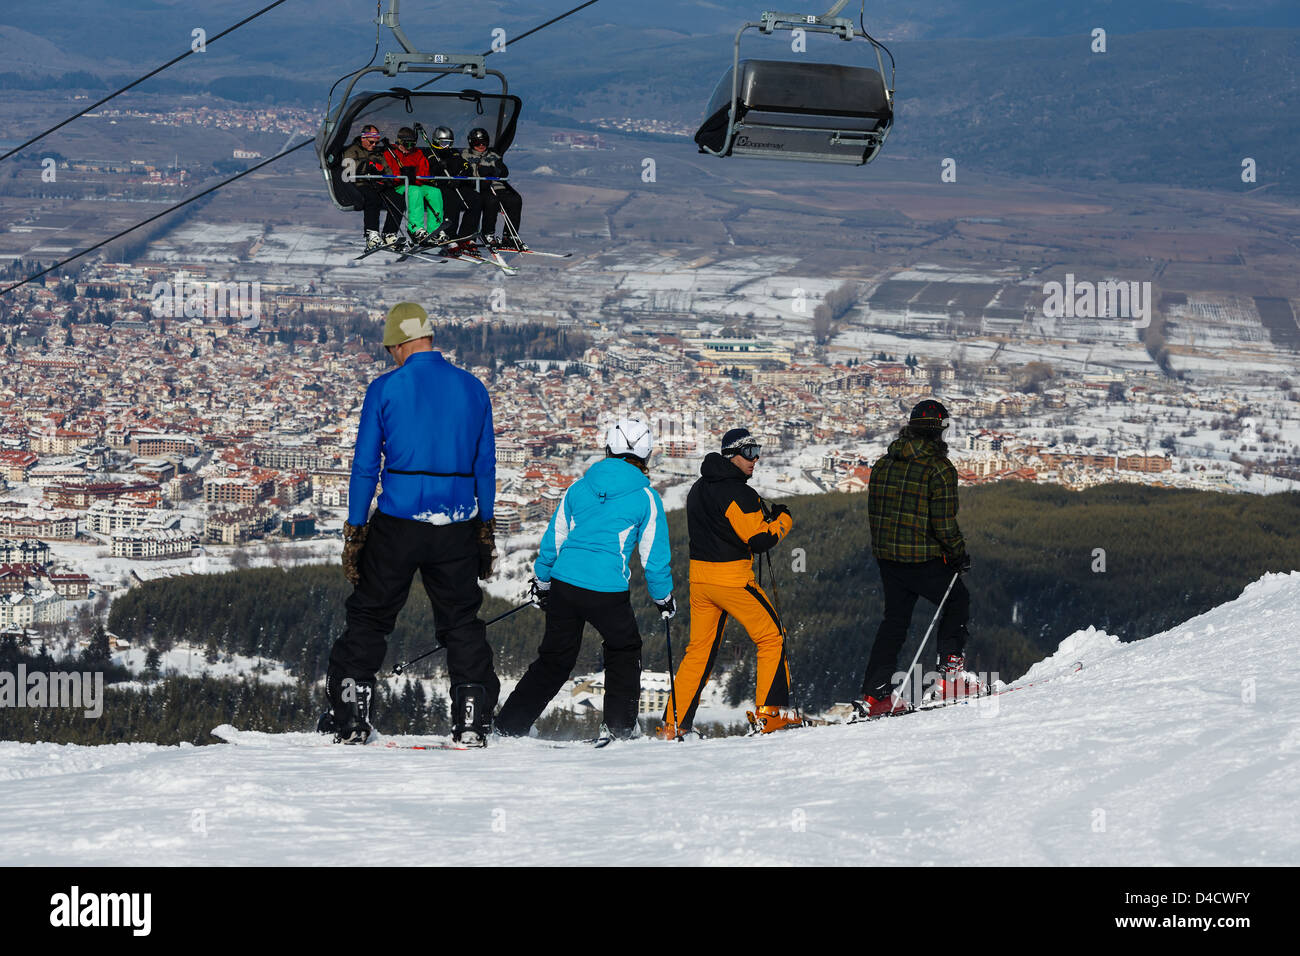 Mountain skiers and snowboarders at top of a slope of the mountain before skiing Stock Photo